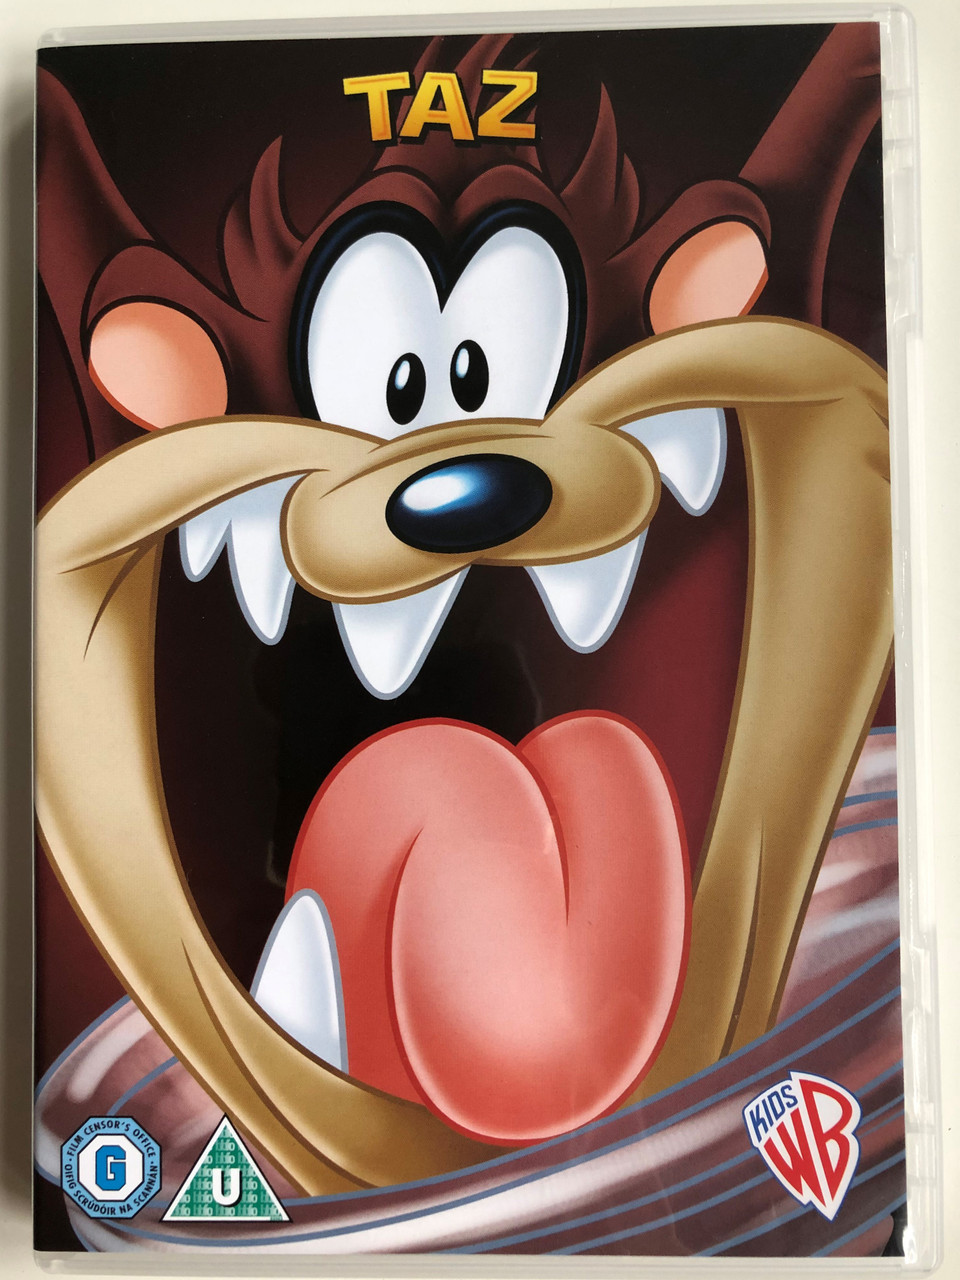 Taz DVD Tasmanian devil / Classic Vartoon / 7 episodes - The Dog The turtle  Story, Like Father, Like Son, Frights of Passage, War and Pieces, Airbourne  Airhead, It's No Picnic, Kee-Wee